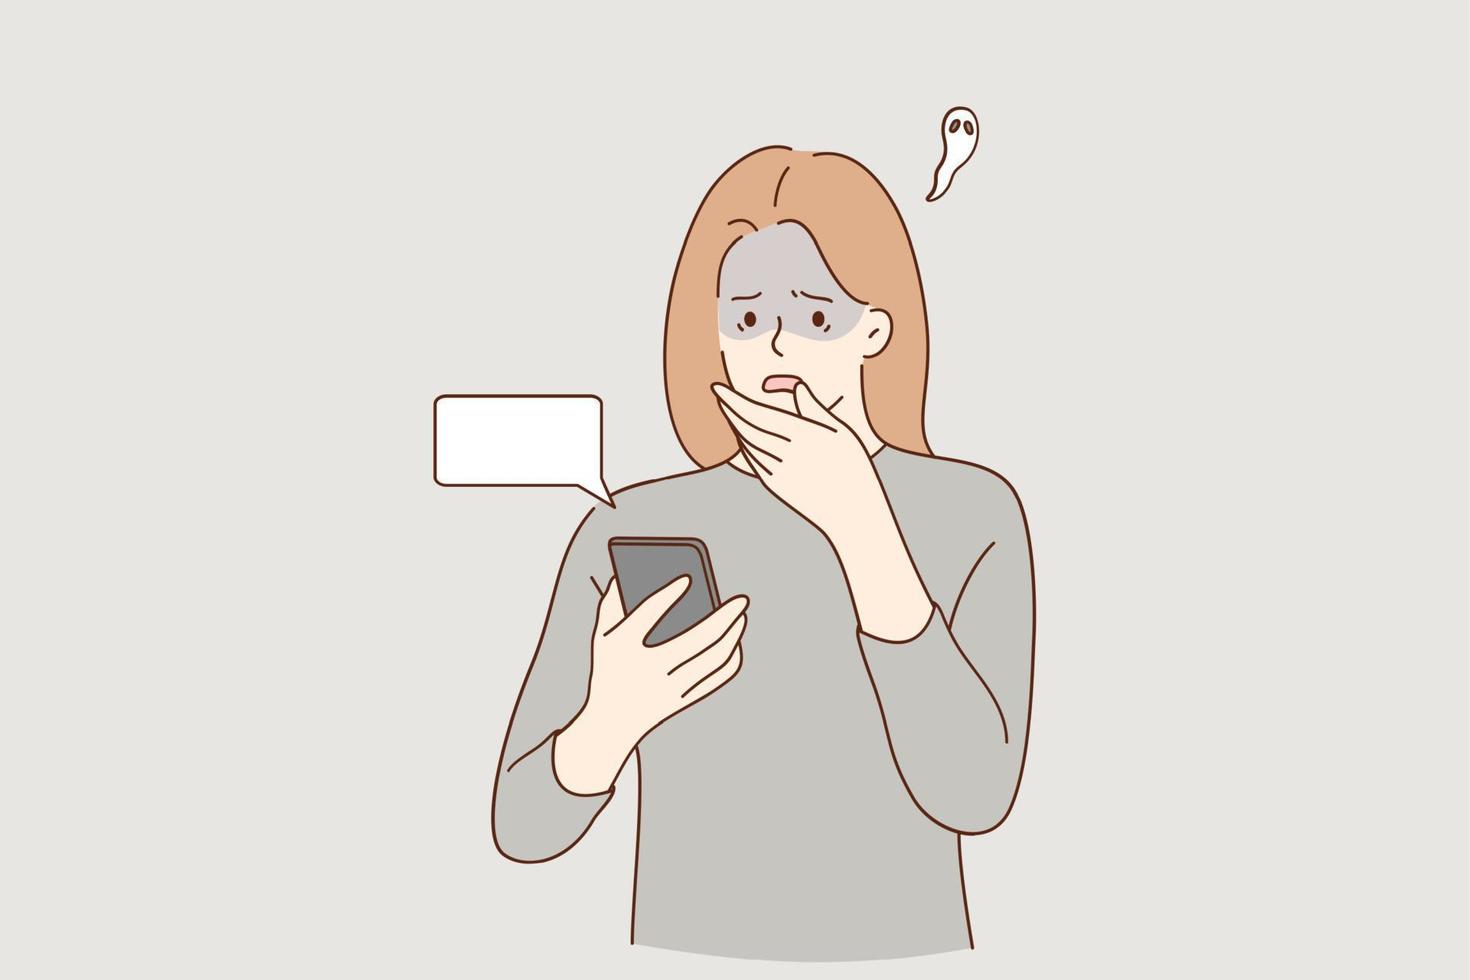 Frustration, broken phone, problems in communication concept. Worried concerned girl cartoon character looking at her phone screen cracked and shattered to pieces or feeling bad with message vector